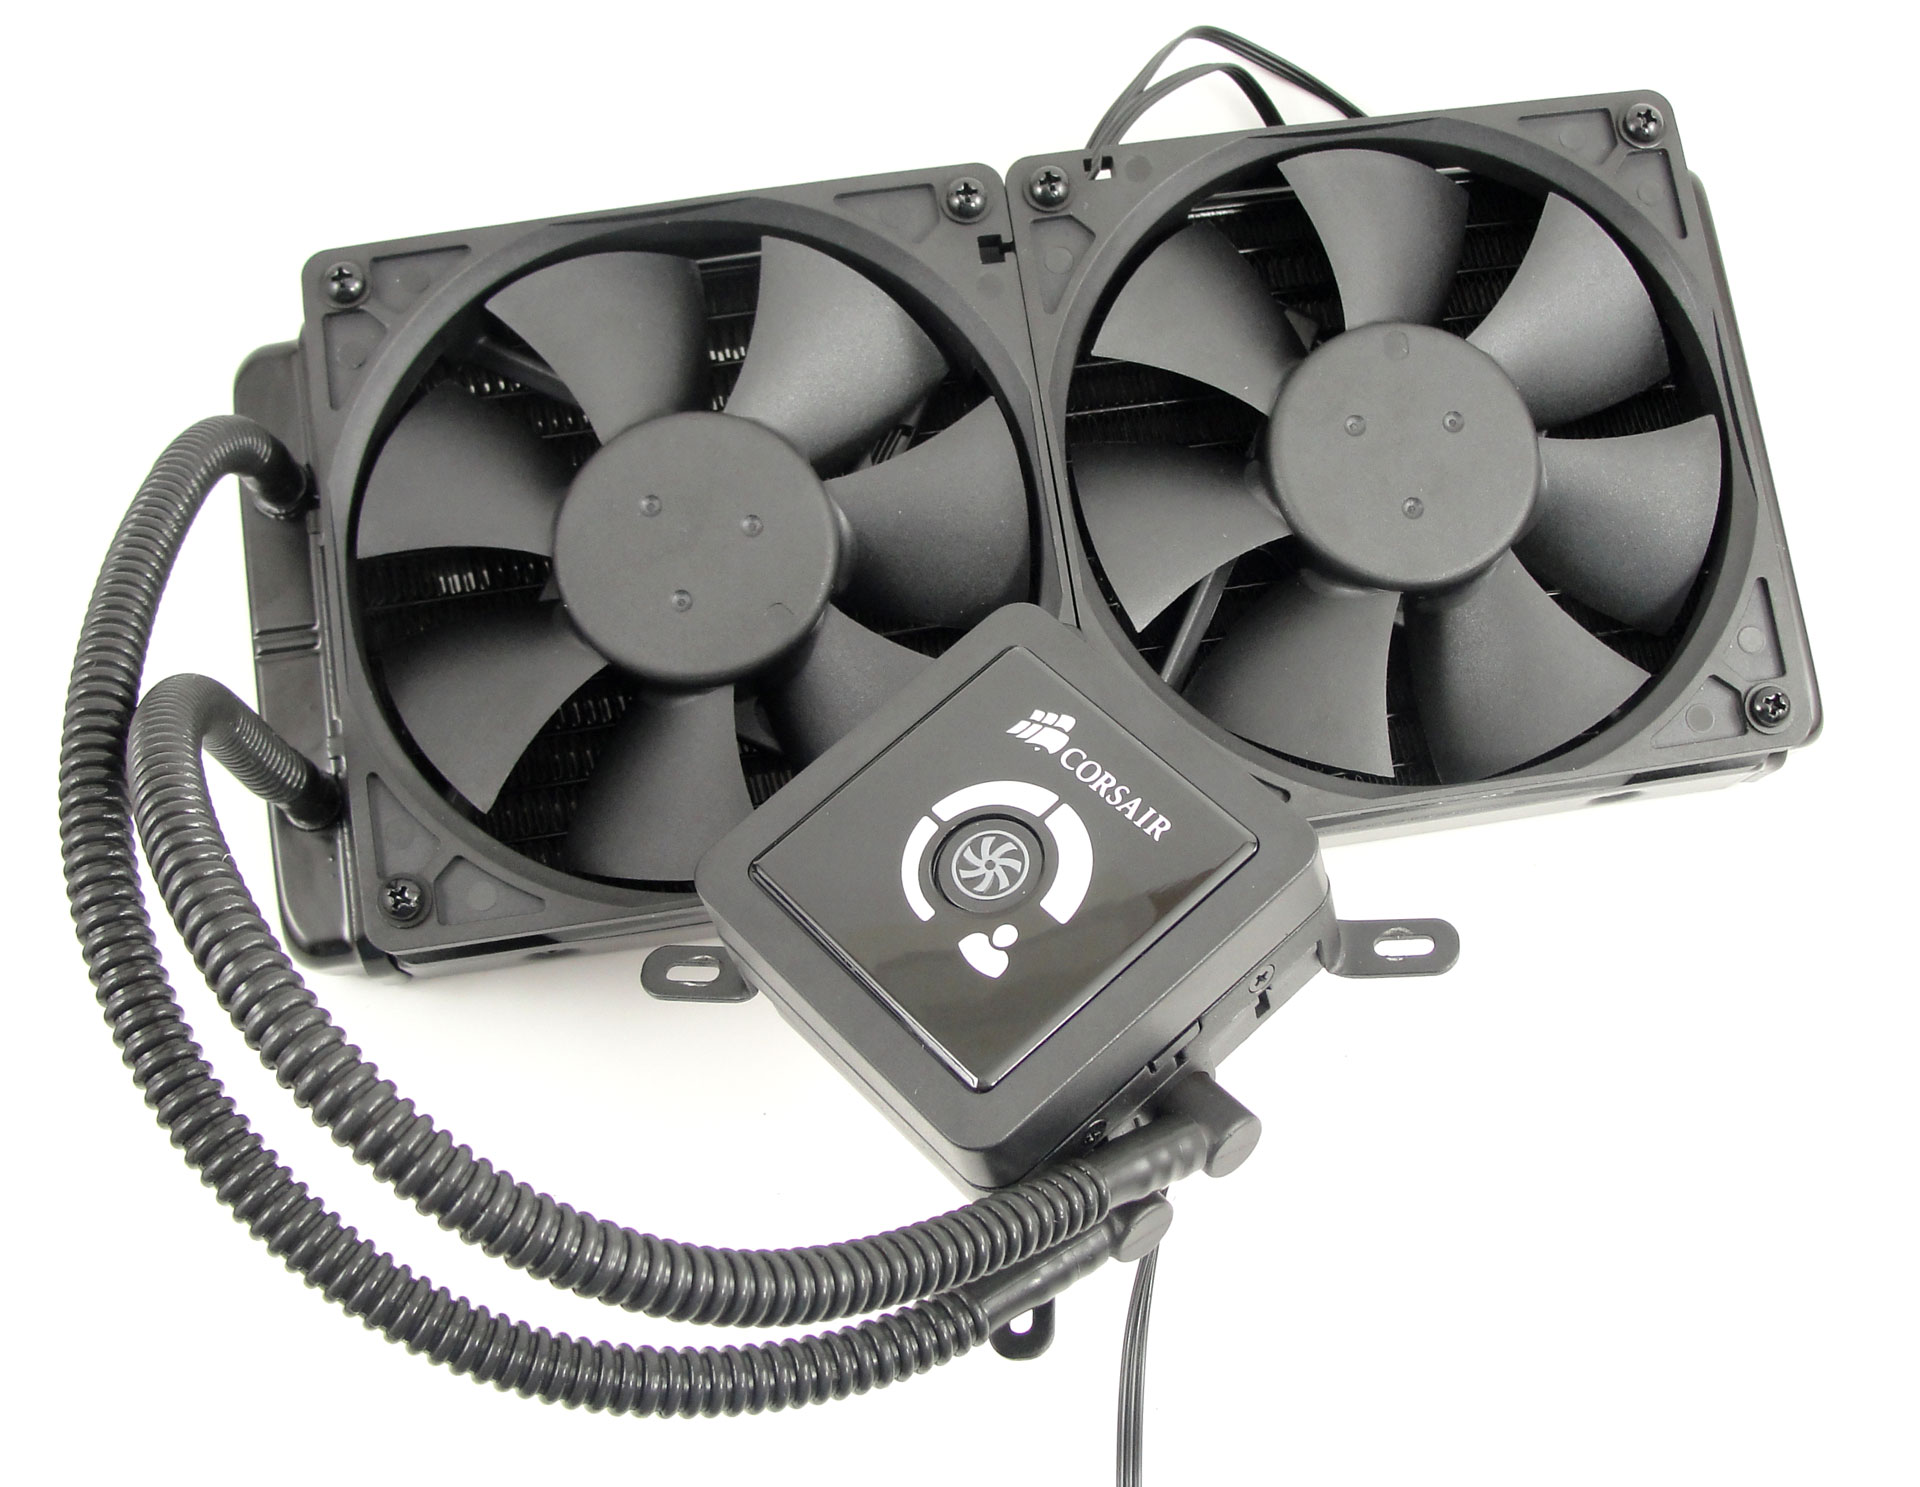 Costly but Good - Hydro Series: H60, H80 and H100 Reviewed